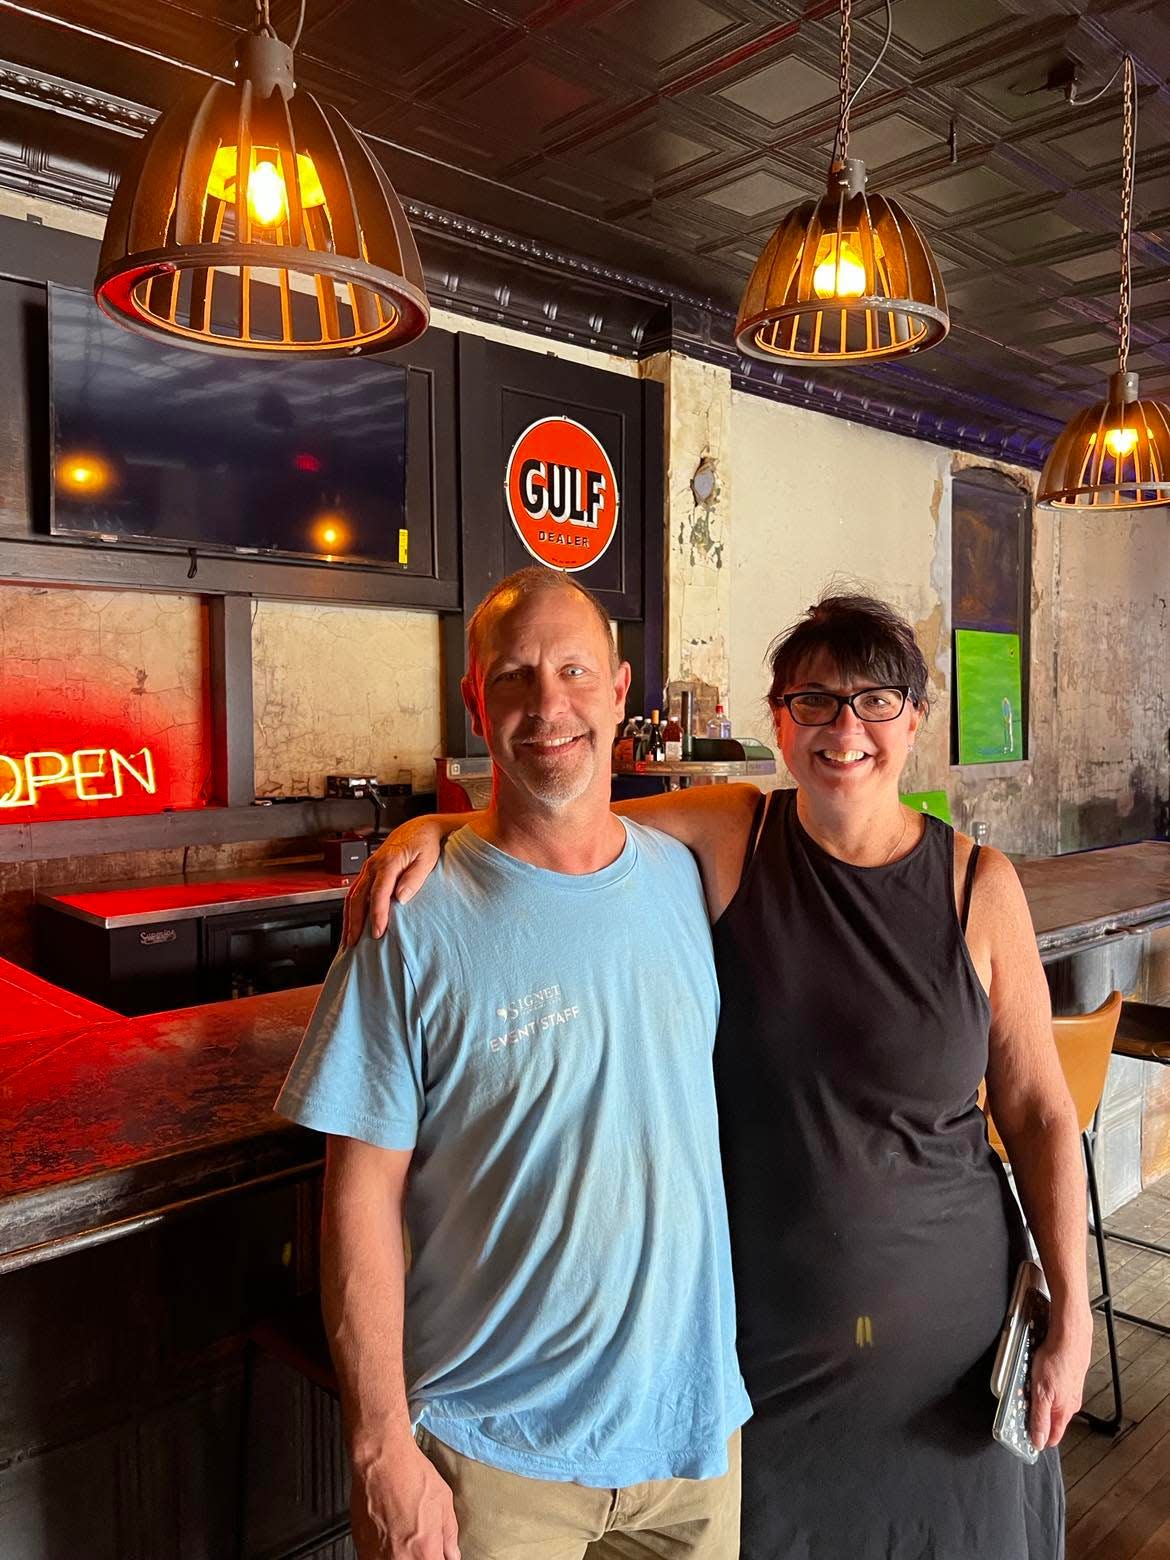 Patrick Huth and Whitney Harris are shown inside Hupp Gulf, a new business in downtown Canton featuring golf simulators, food and drinks. Hupp Gulf expects to open in November.